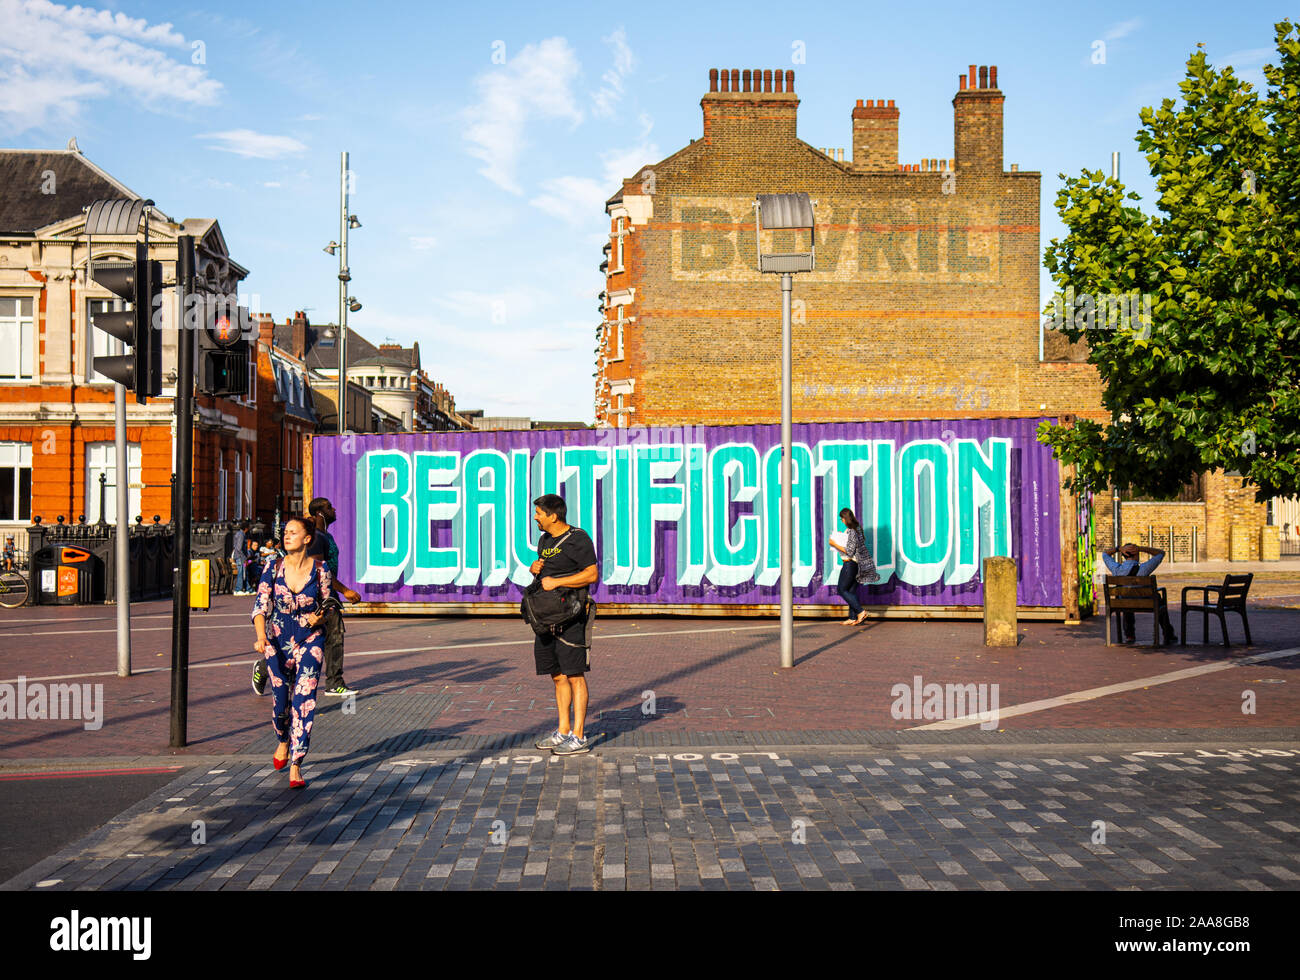 London, England, UK - July 21, 2015: Pedestrians cross a street at Windrush Square in Brixton, a neighbourhood of South London experiencing gentrifica Stock Photo